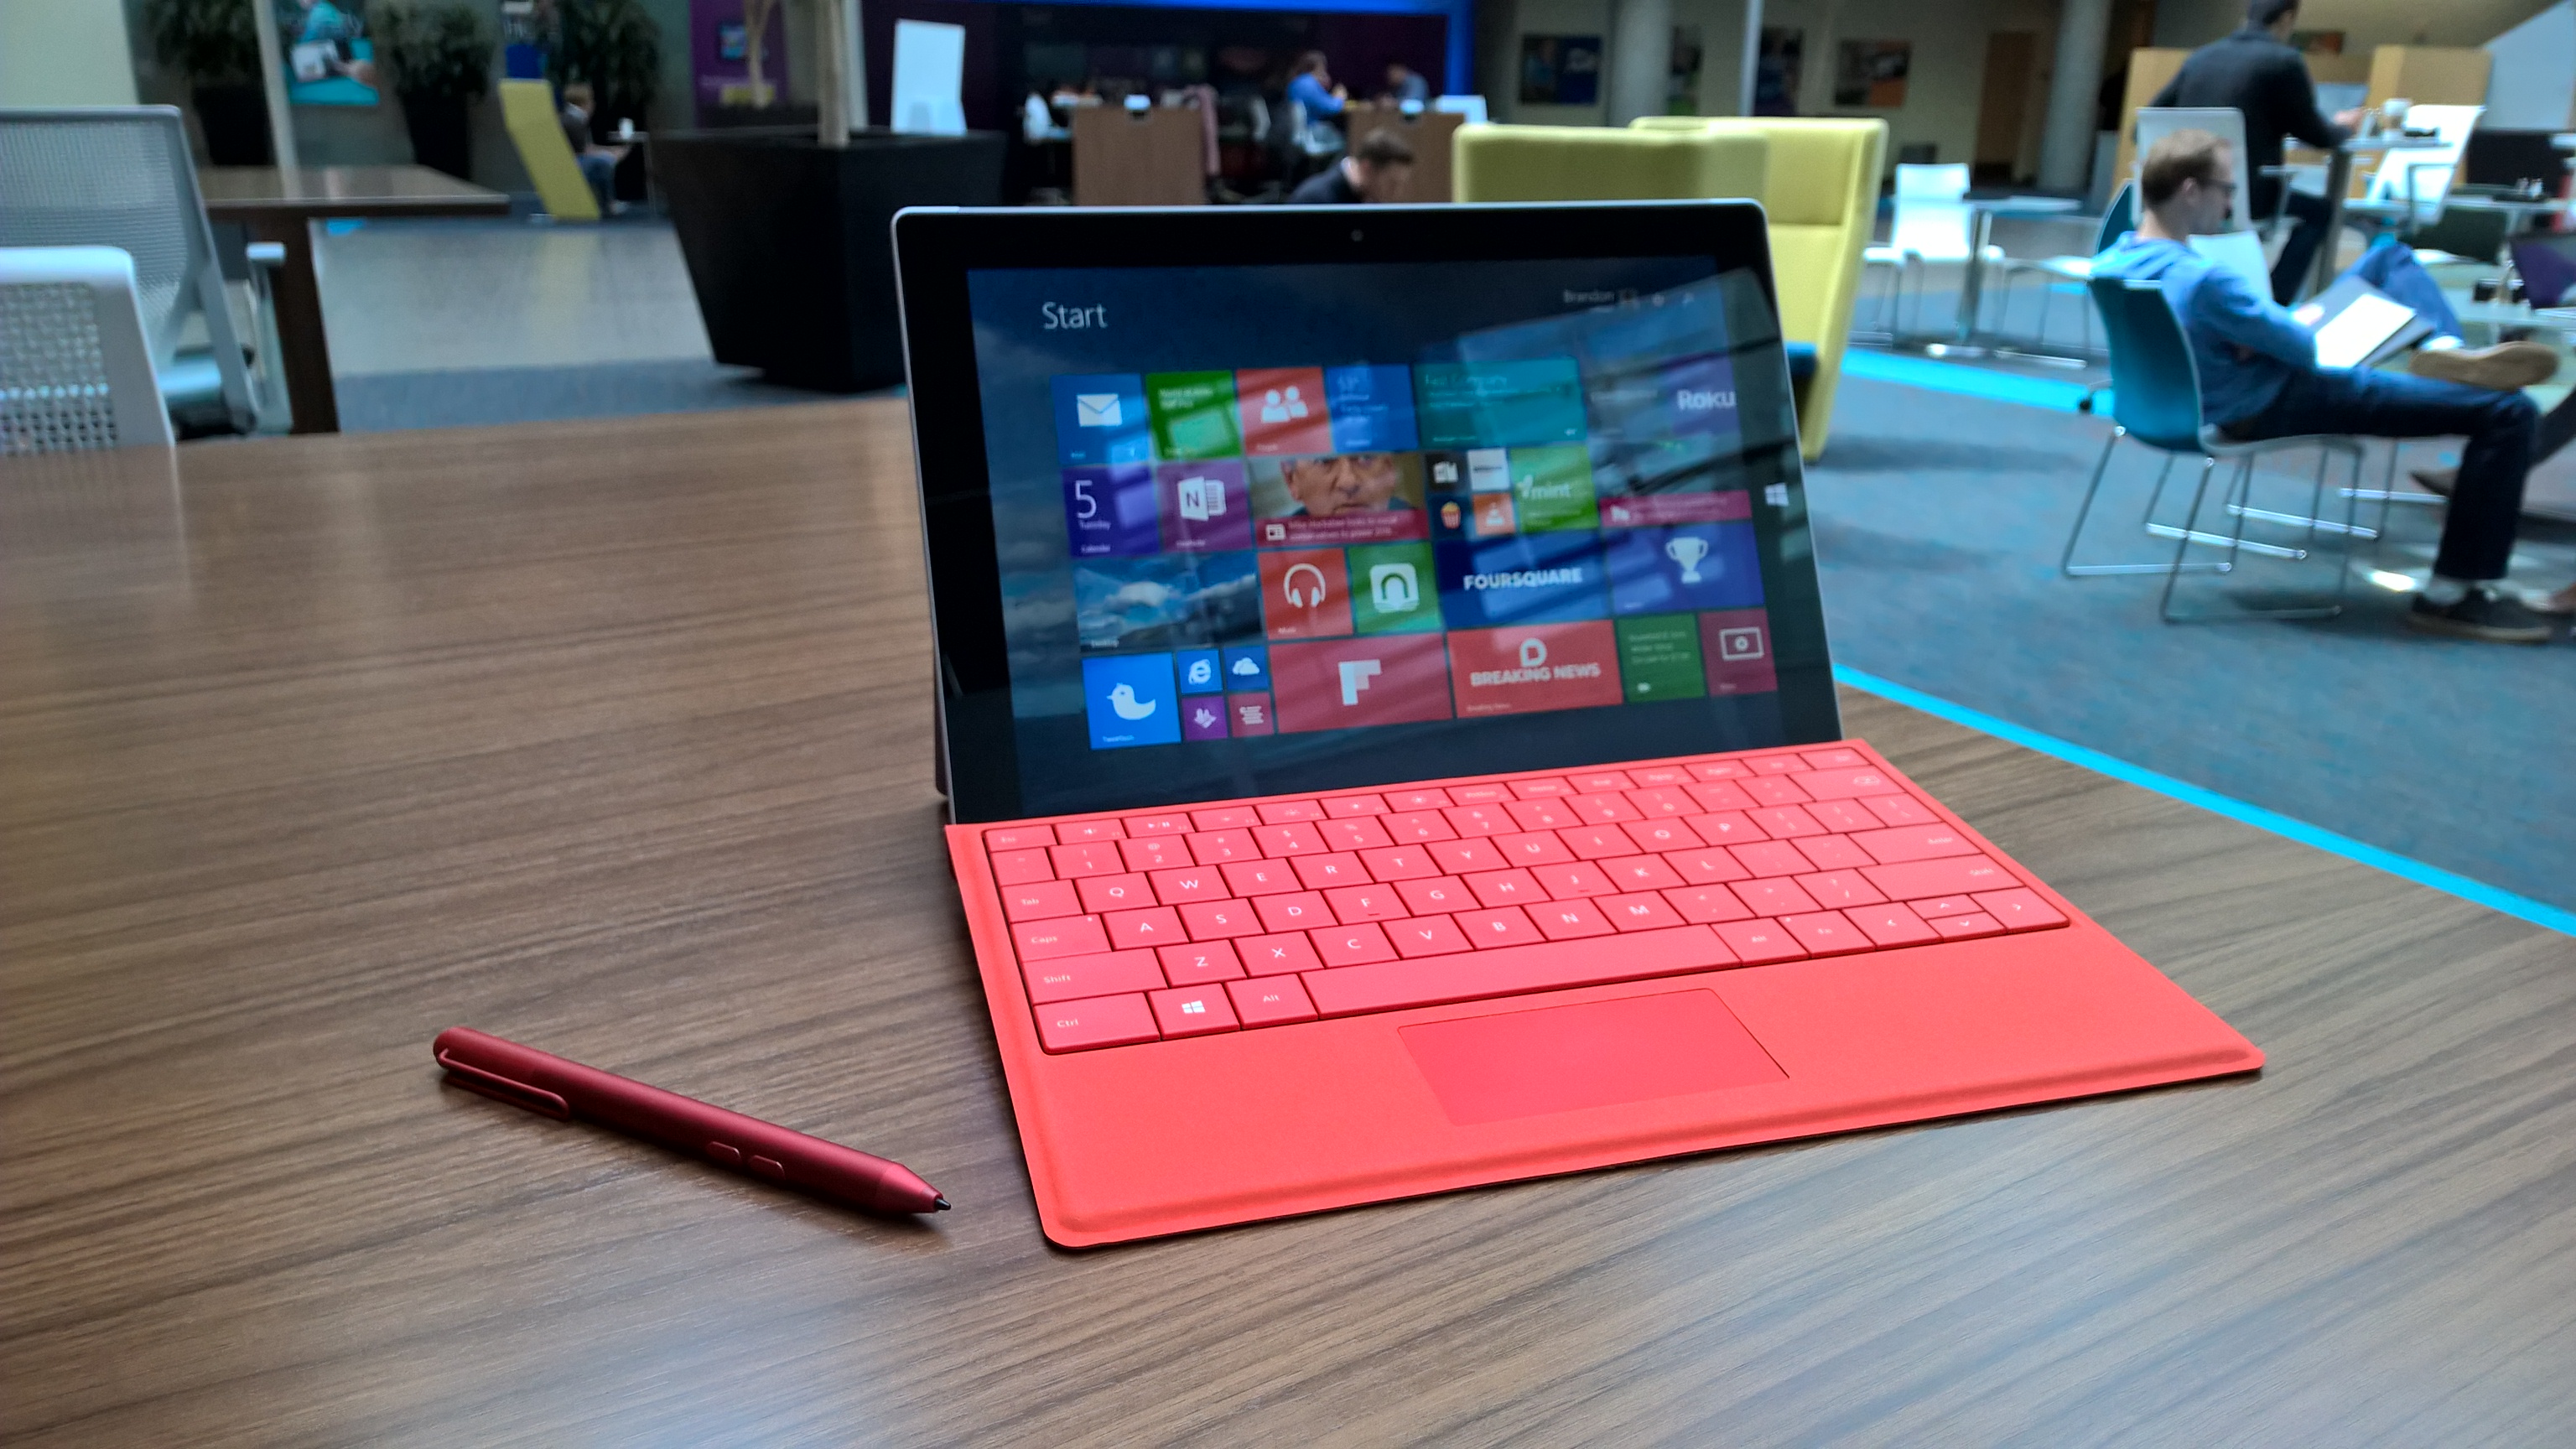 Hands-on with the Surface 3 | Windows Experience Blog